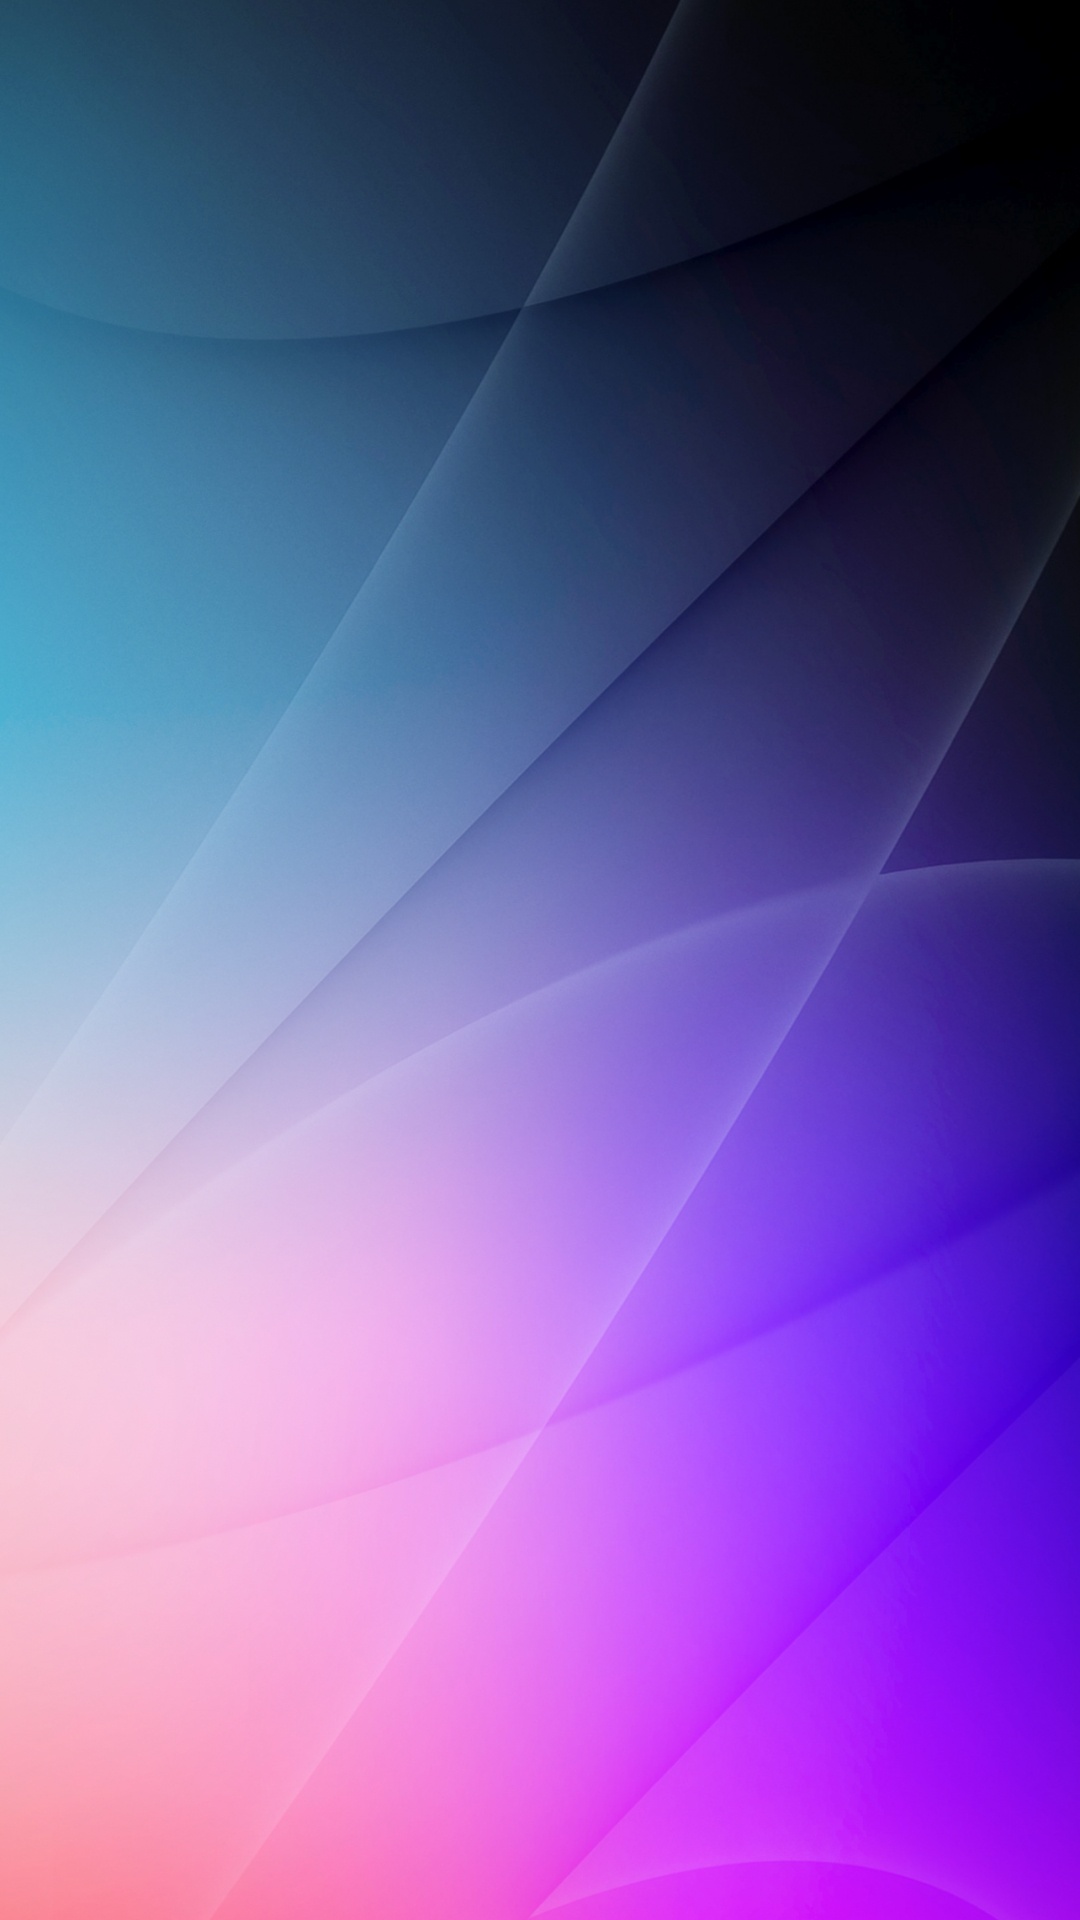 Atmosphere, Colorfulness, Blue, Purple, Violet. Wallpaper in 1080x1920 Resolution